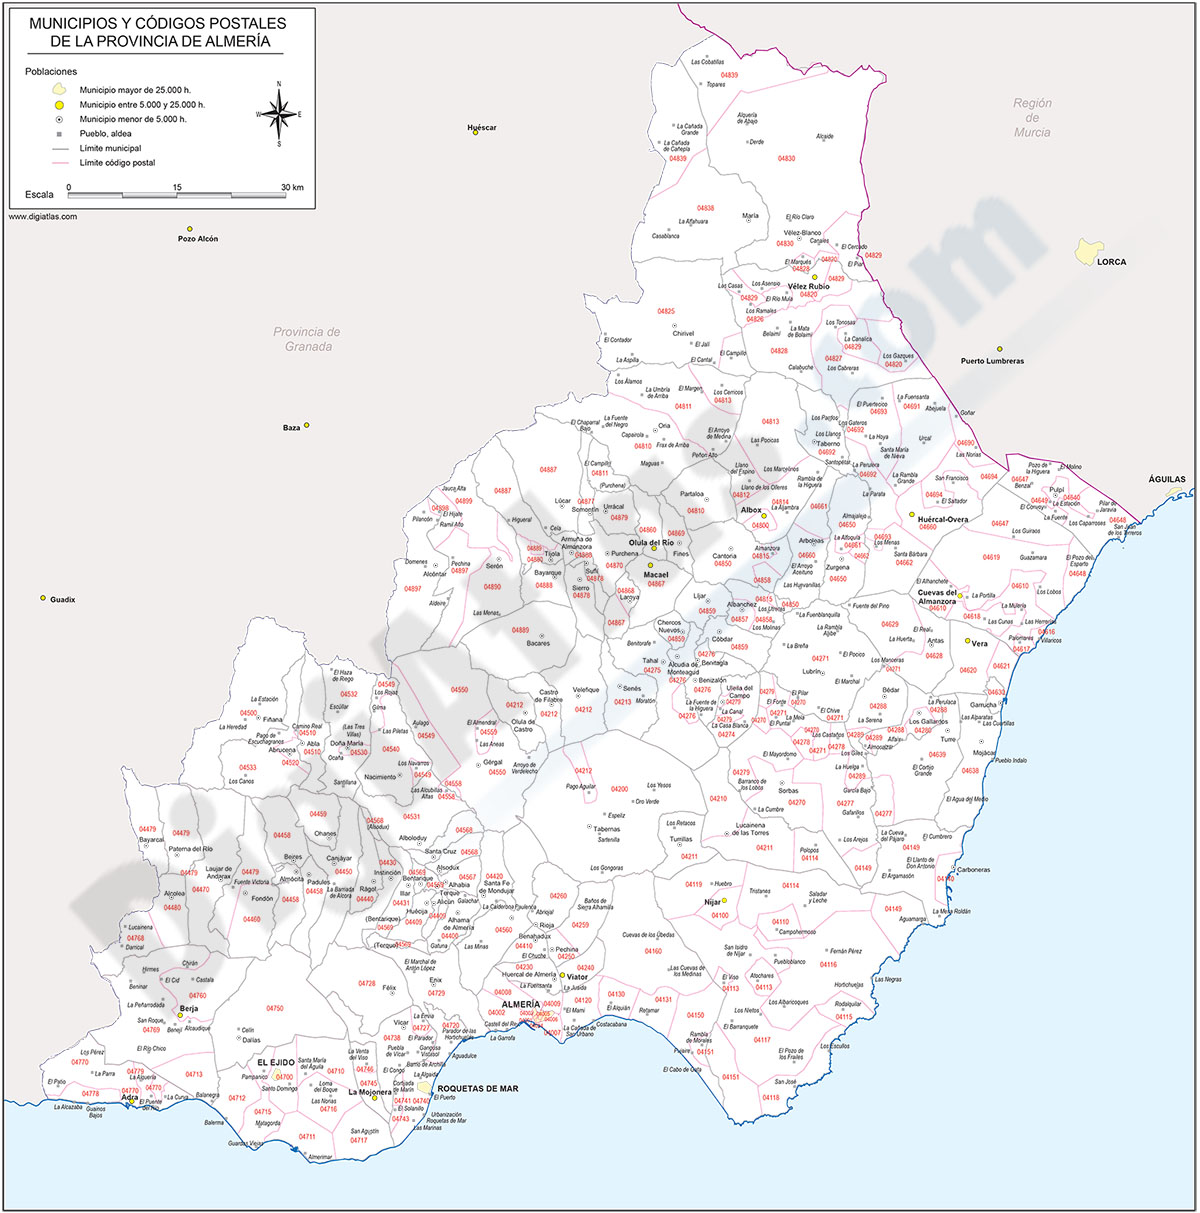 Map of Almeria province with municipalities and postal codes